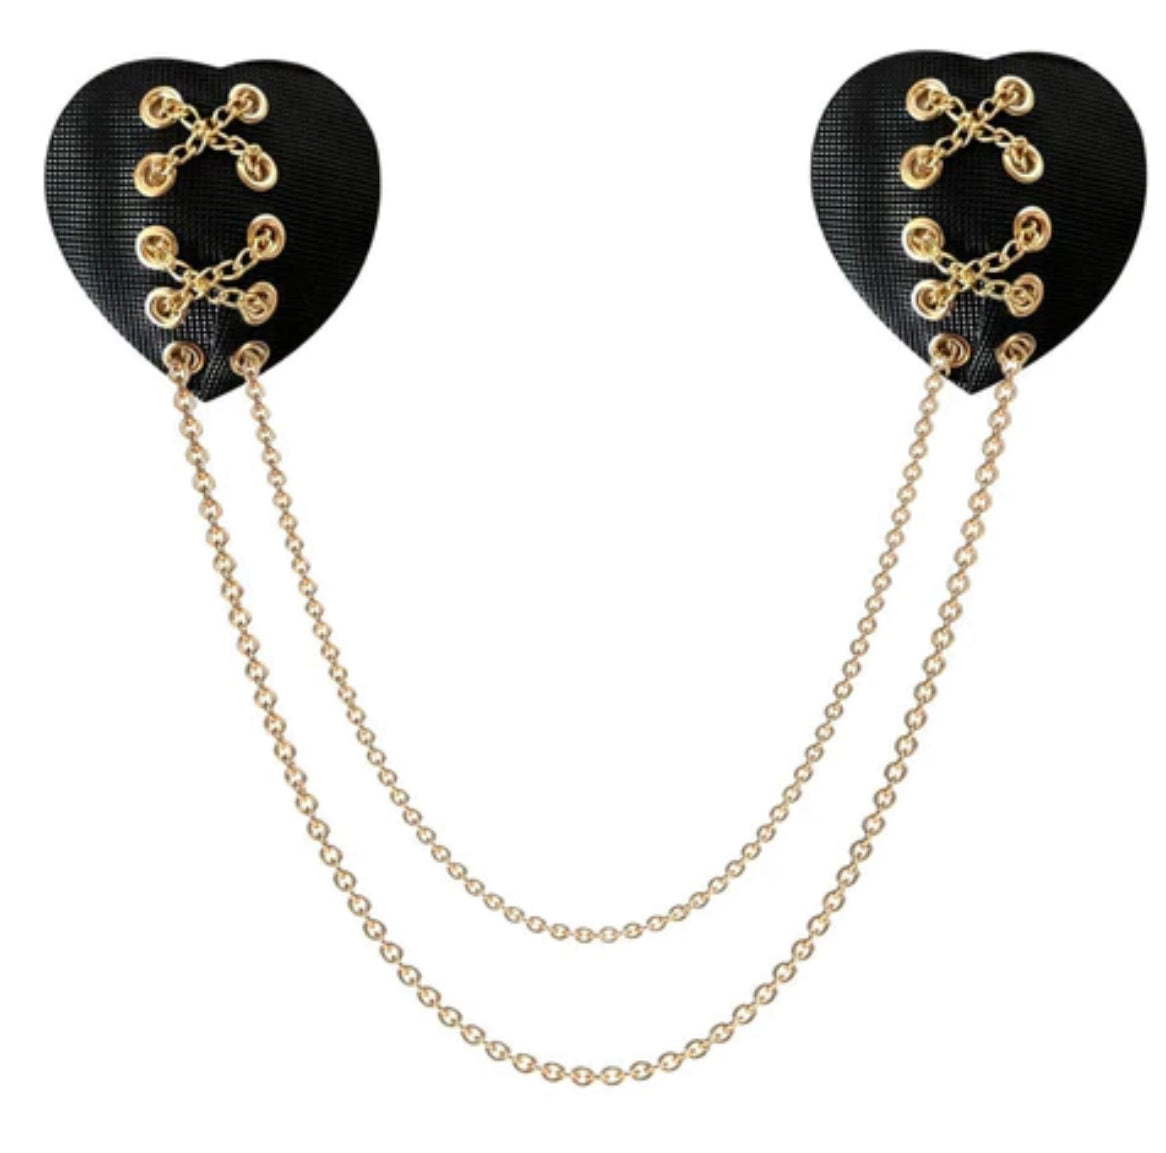 Heart Black Stitched With Gold Chains Reusable Pasties